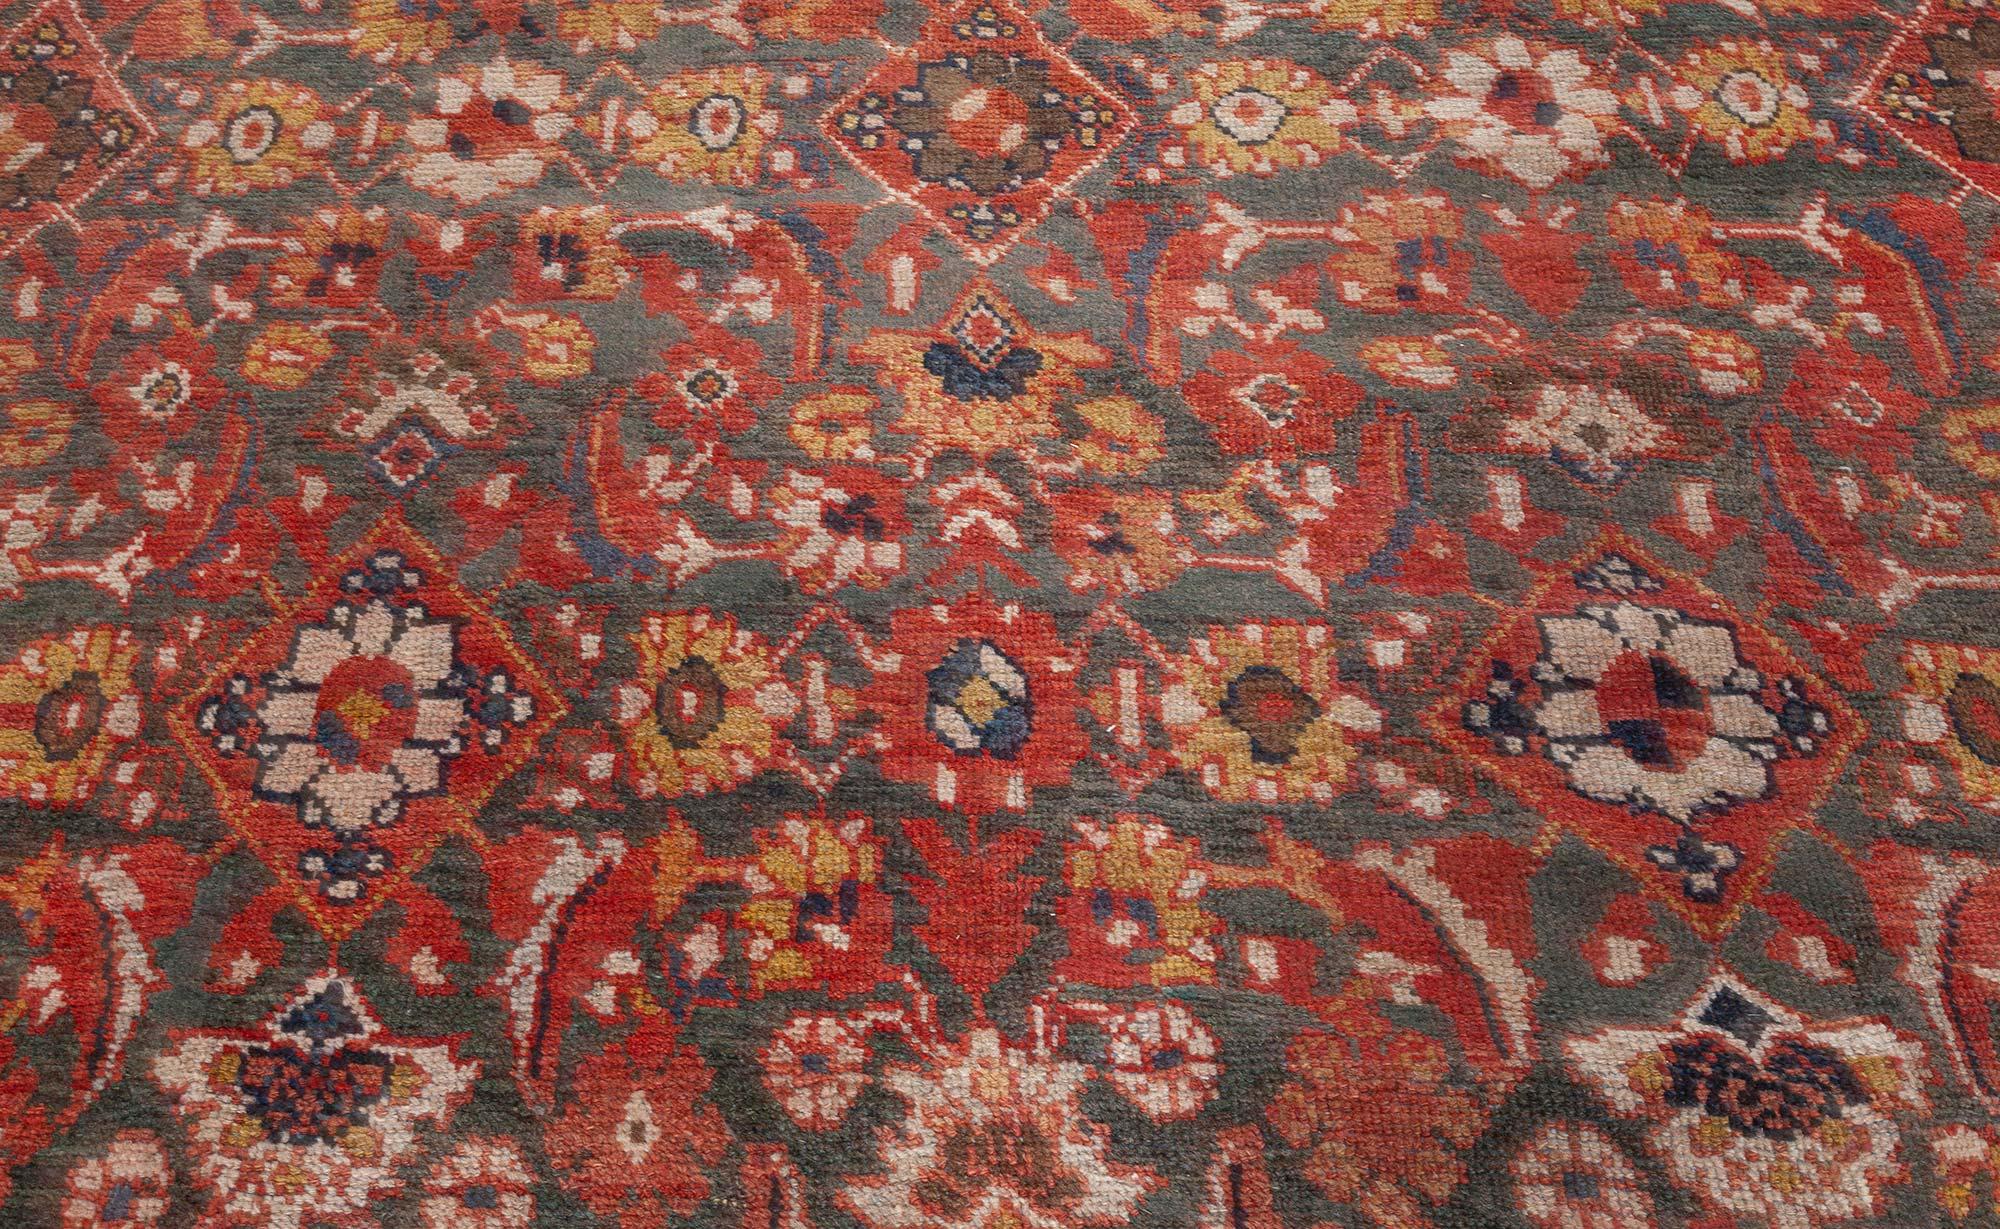 Antique Persian Sultanabad Rug
Size: 8'5